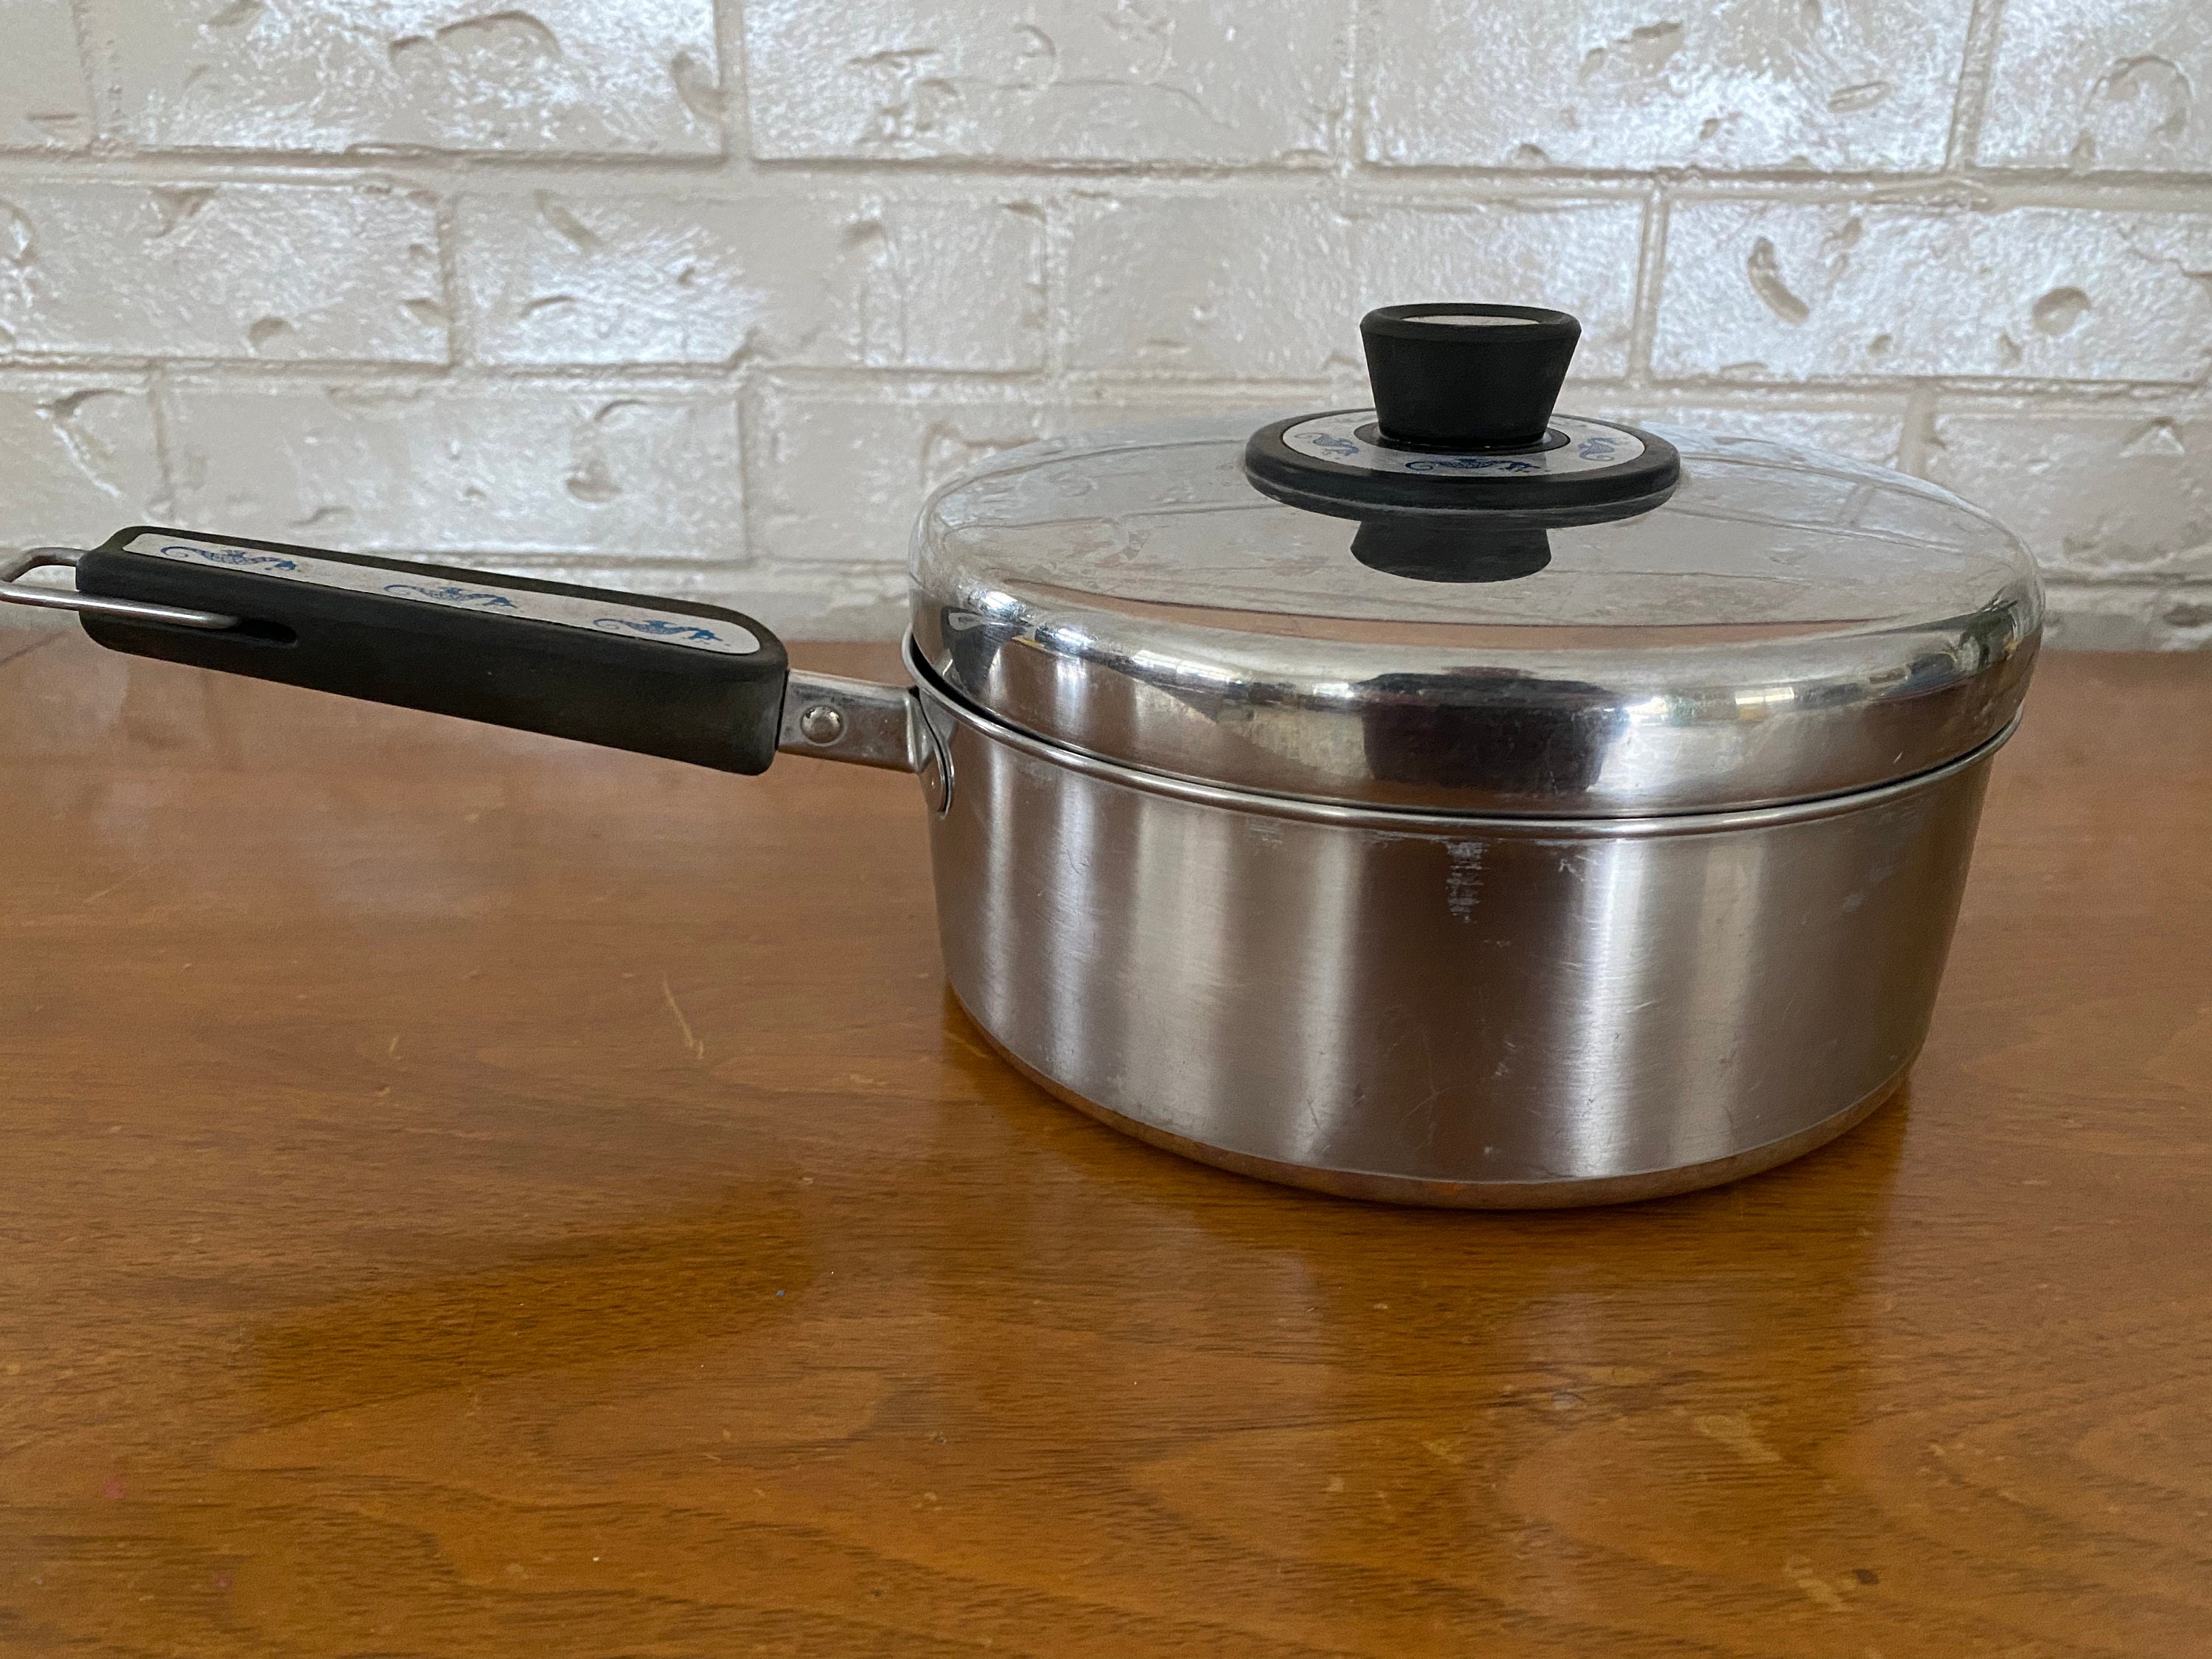 Sold at Auction: Pre-Owned Revere Ware Pots / Pans and More